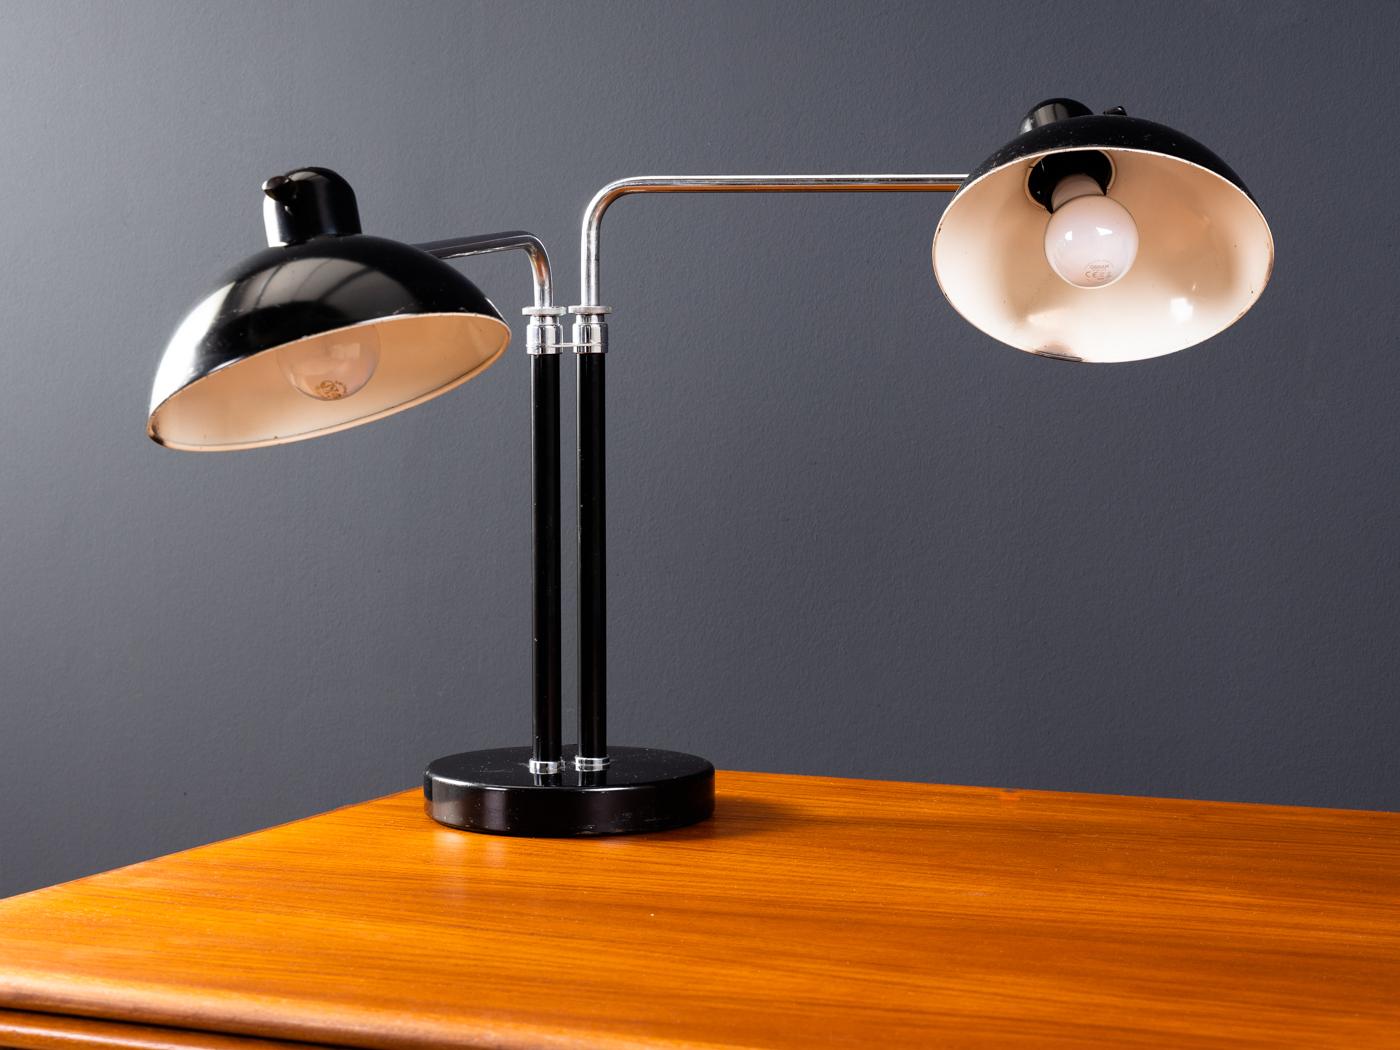 The two-armed table lamp model 